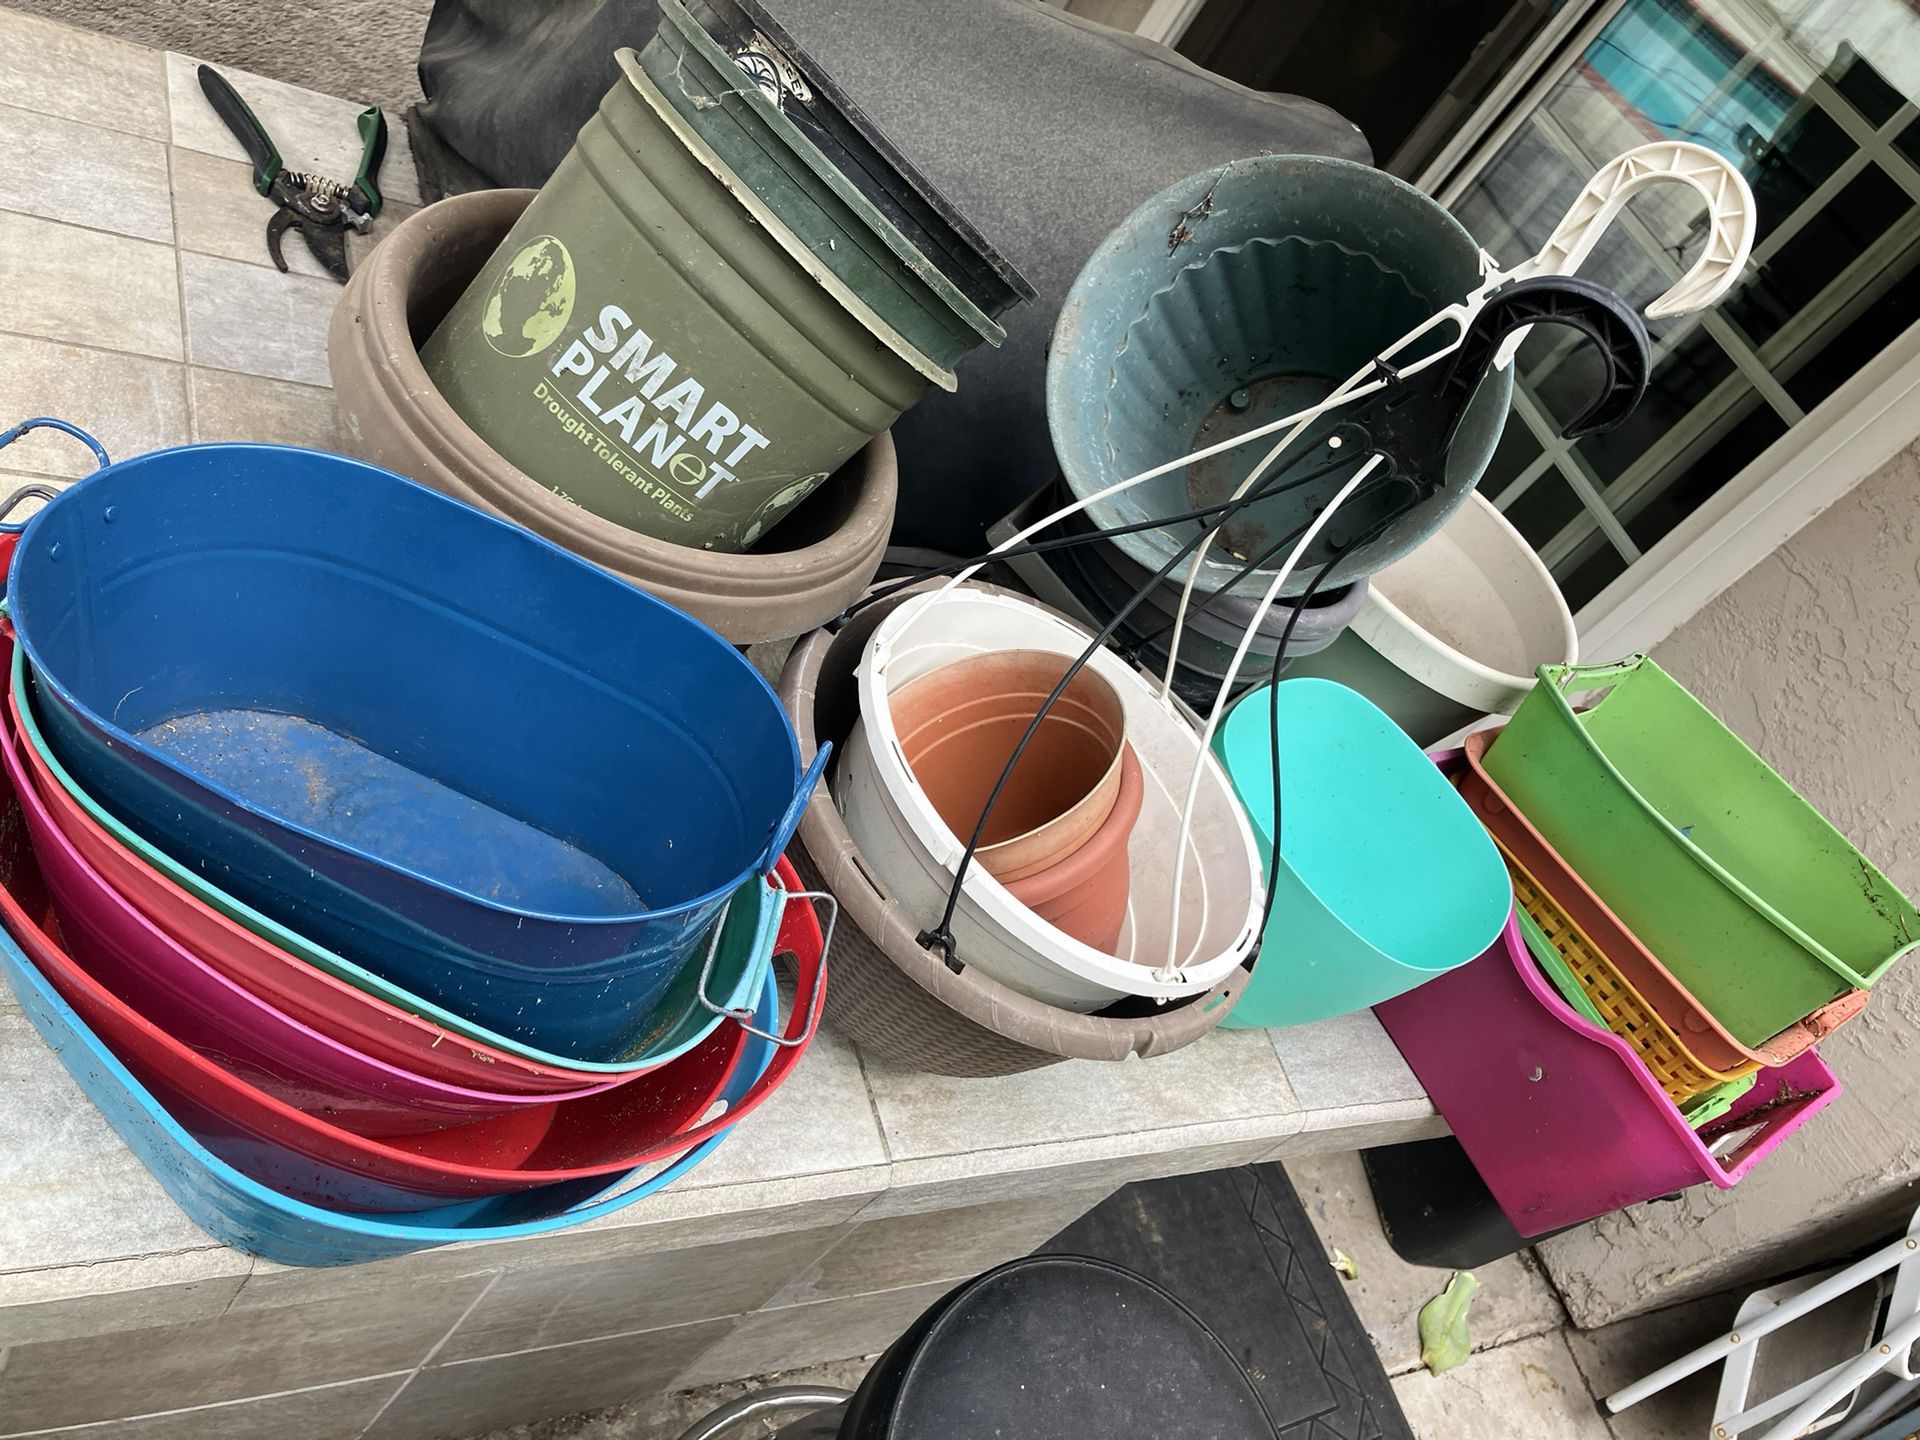 Pots All For $19